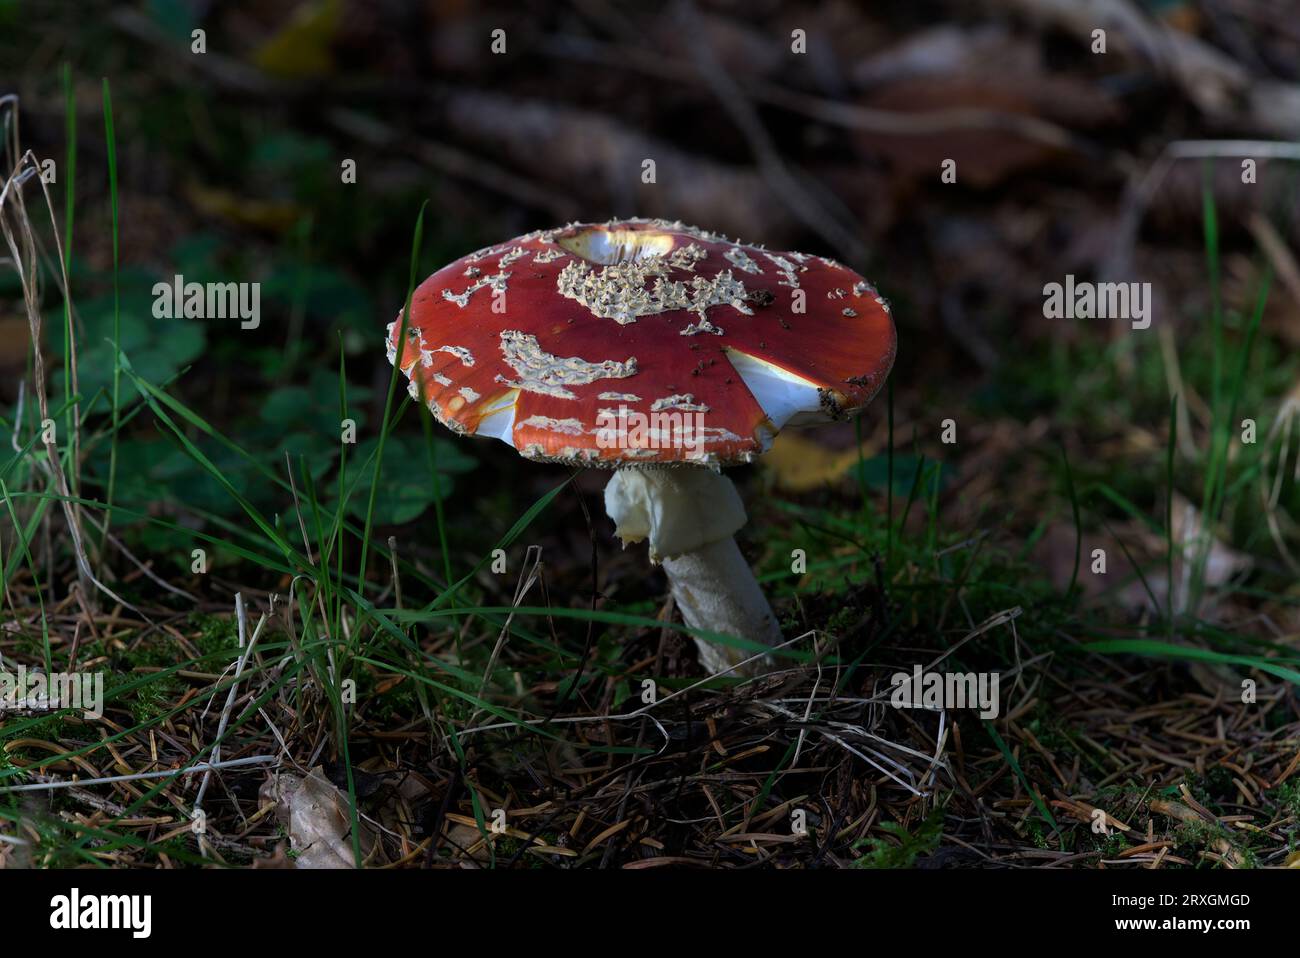 Amanite tue-mouches (Amanita muscaria) or Fausse oronge, red cap and white spots, in the forest. Stock Photo